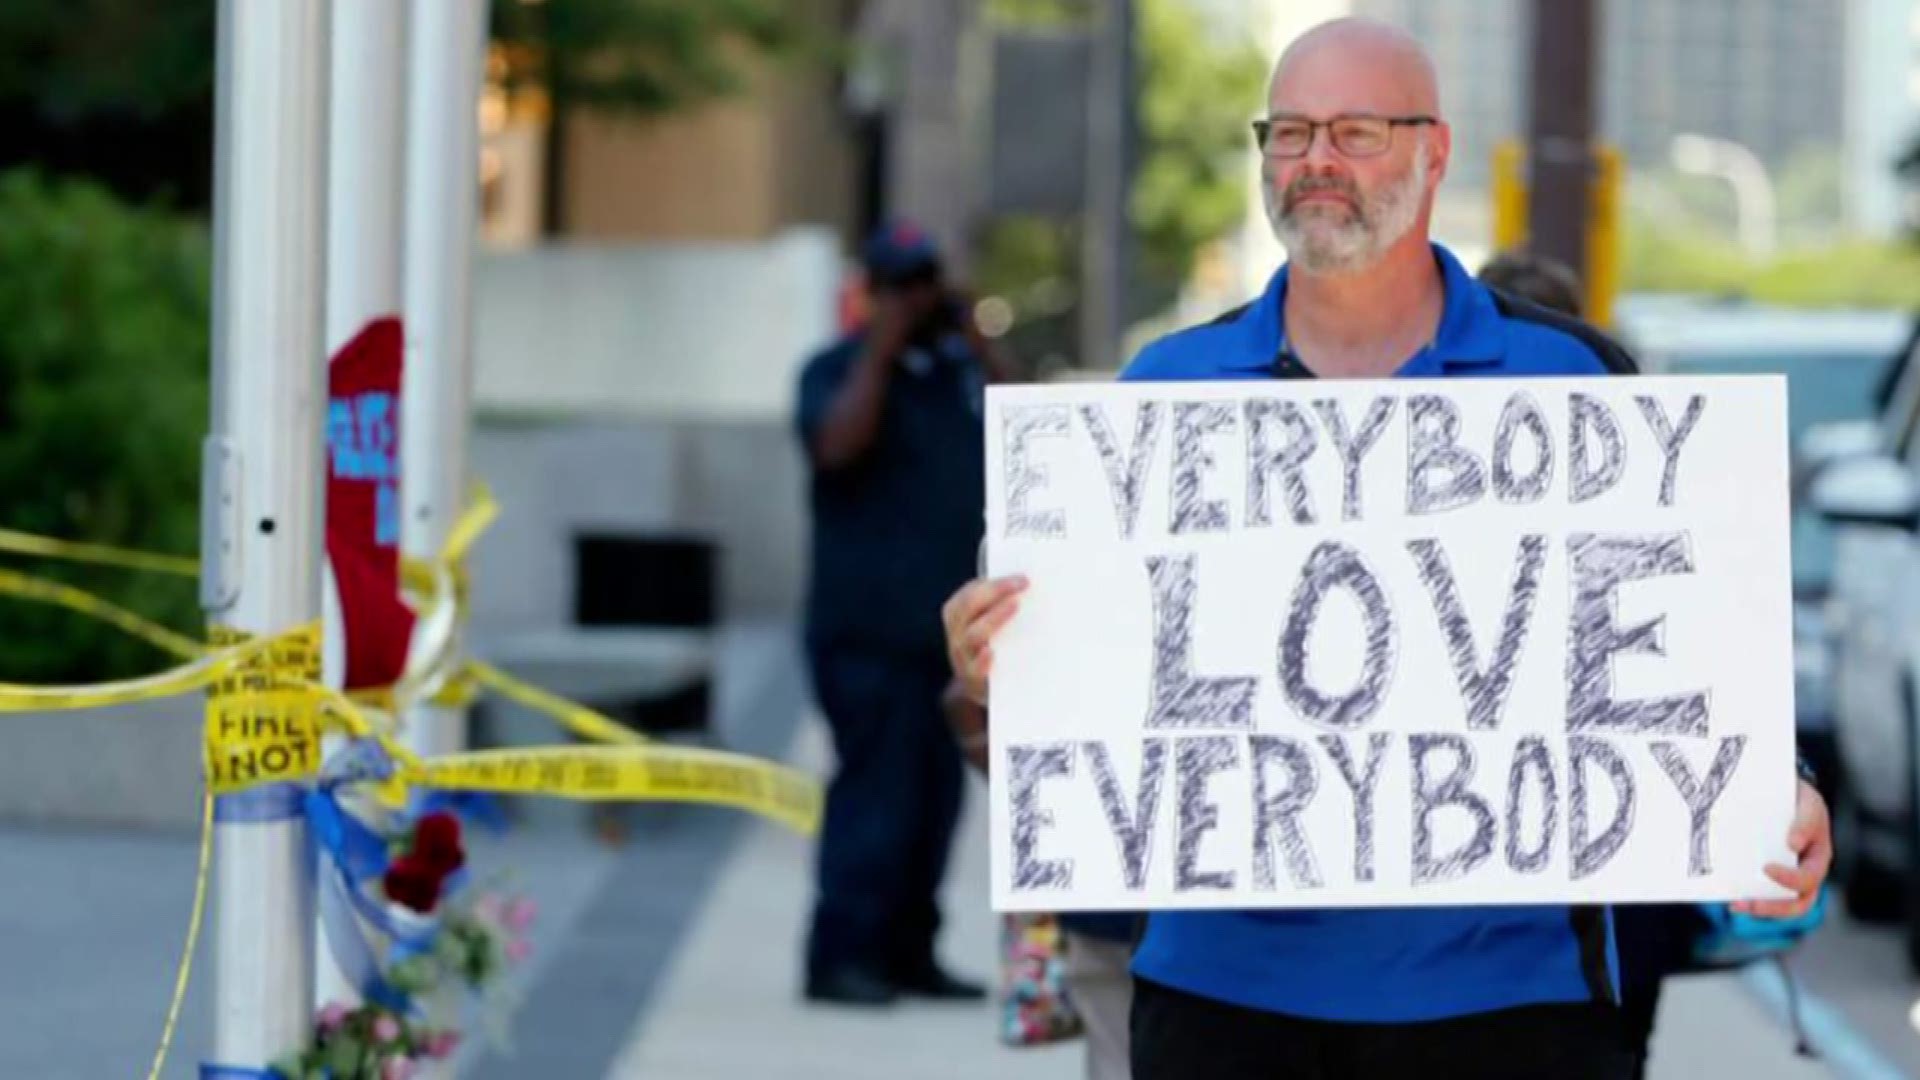 Man trying to help the world 'love' after July 7th ambush